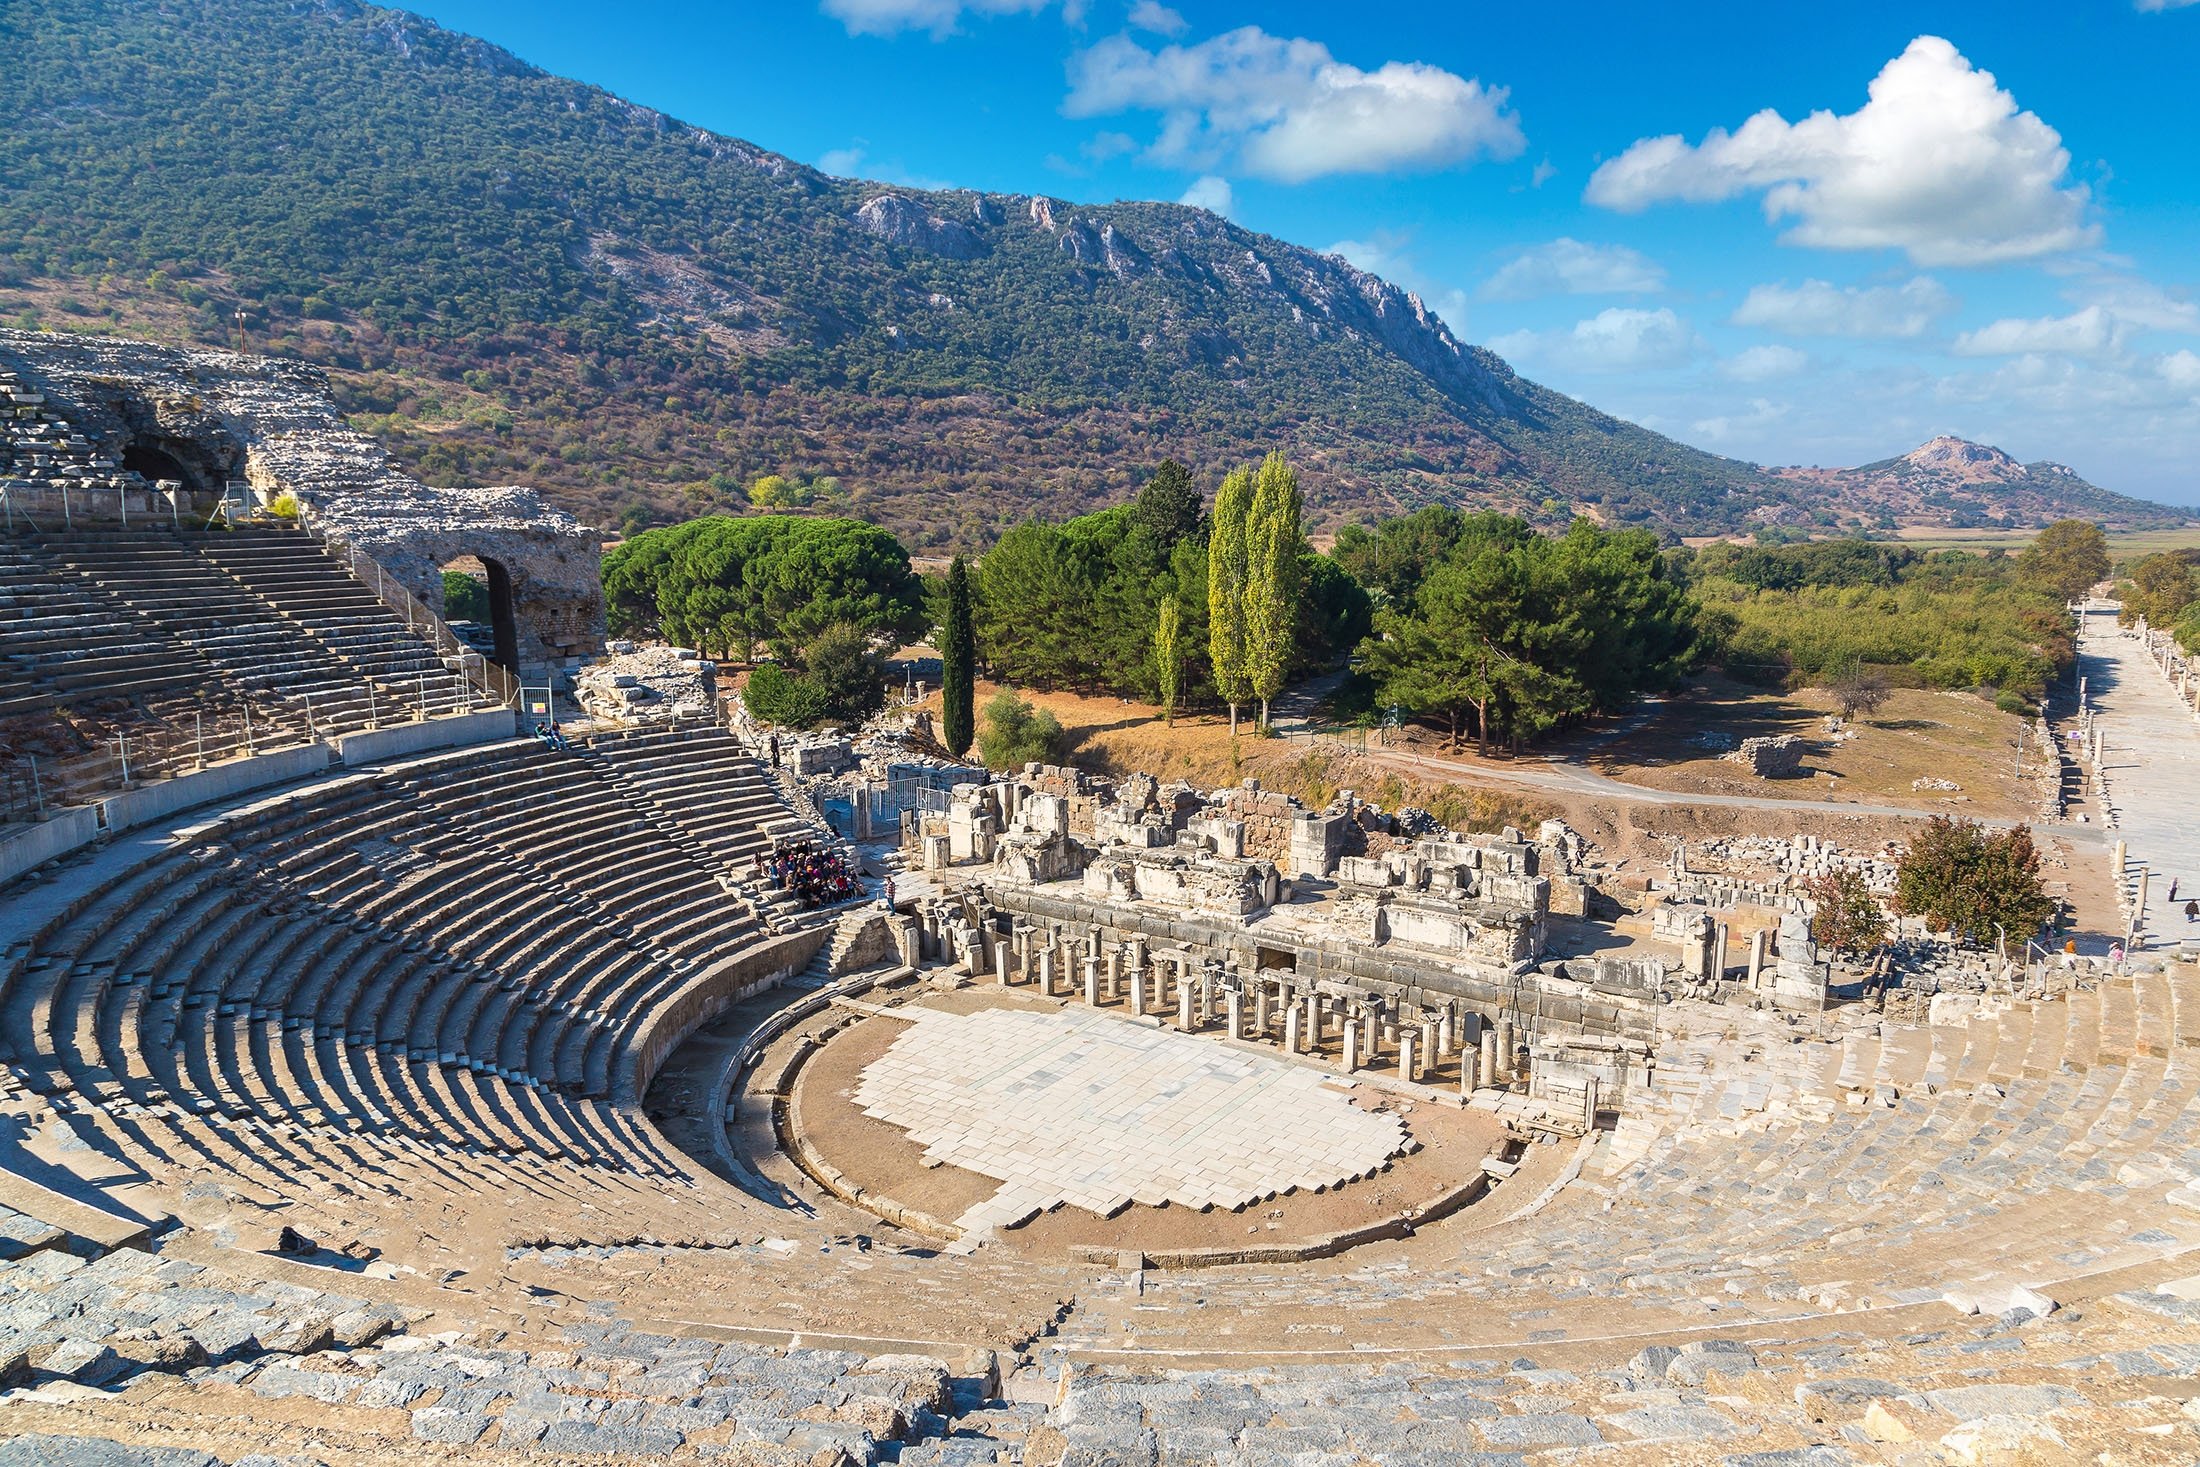 The antique theater of Turkey's most spectacularly preserved ancient city of Ephesus provides a once-in-a-lifetime experience when hosting performances.  (Shutterstock photo)